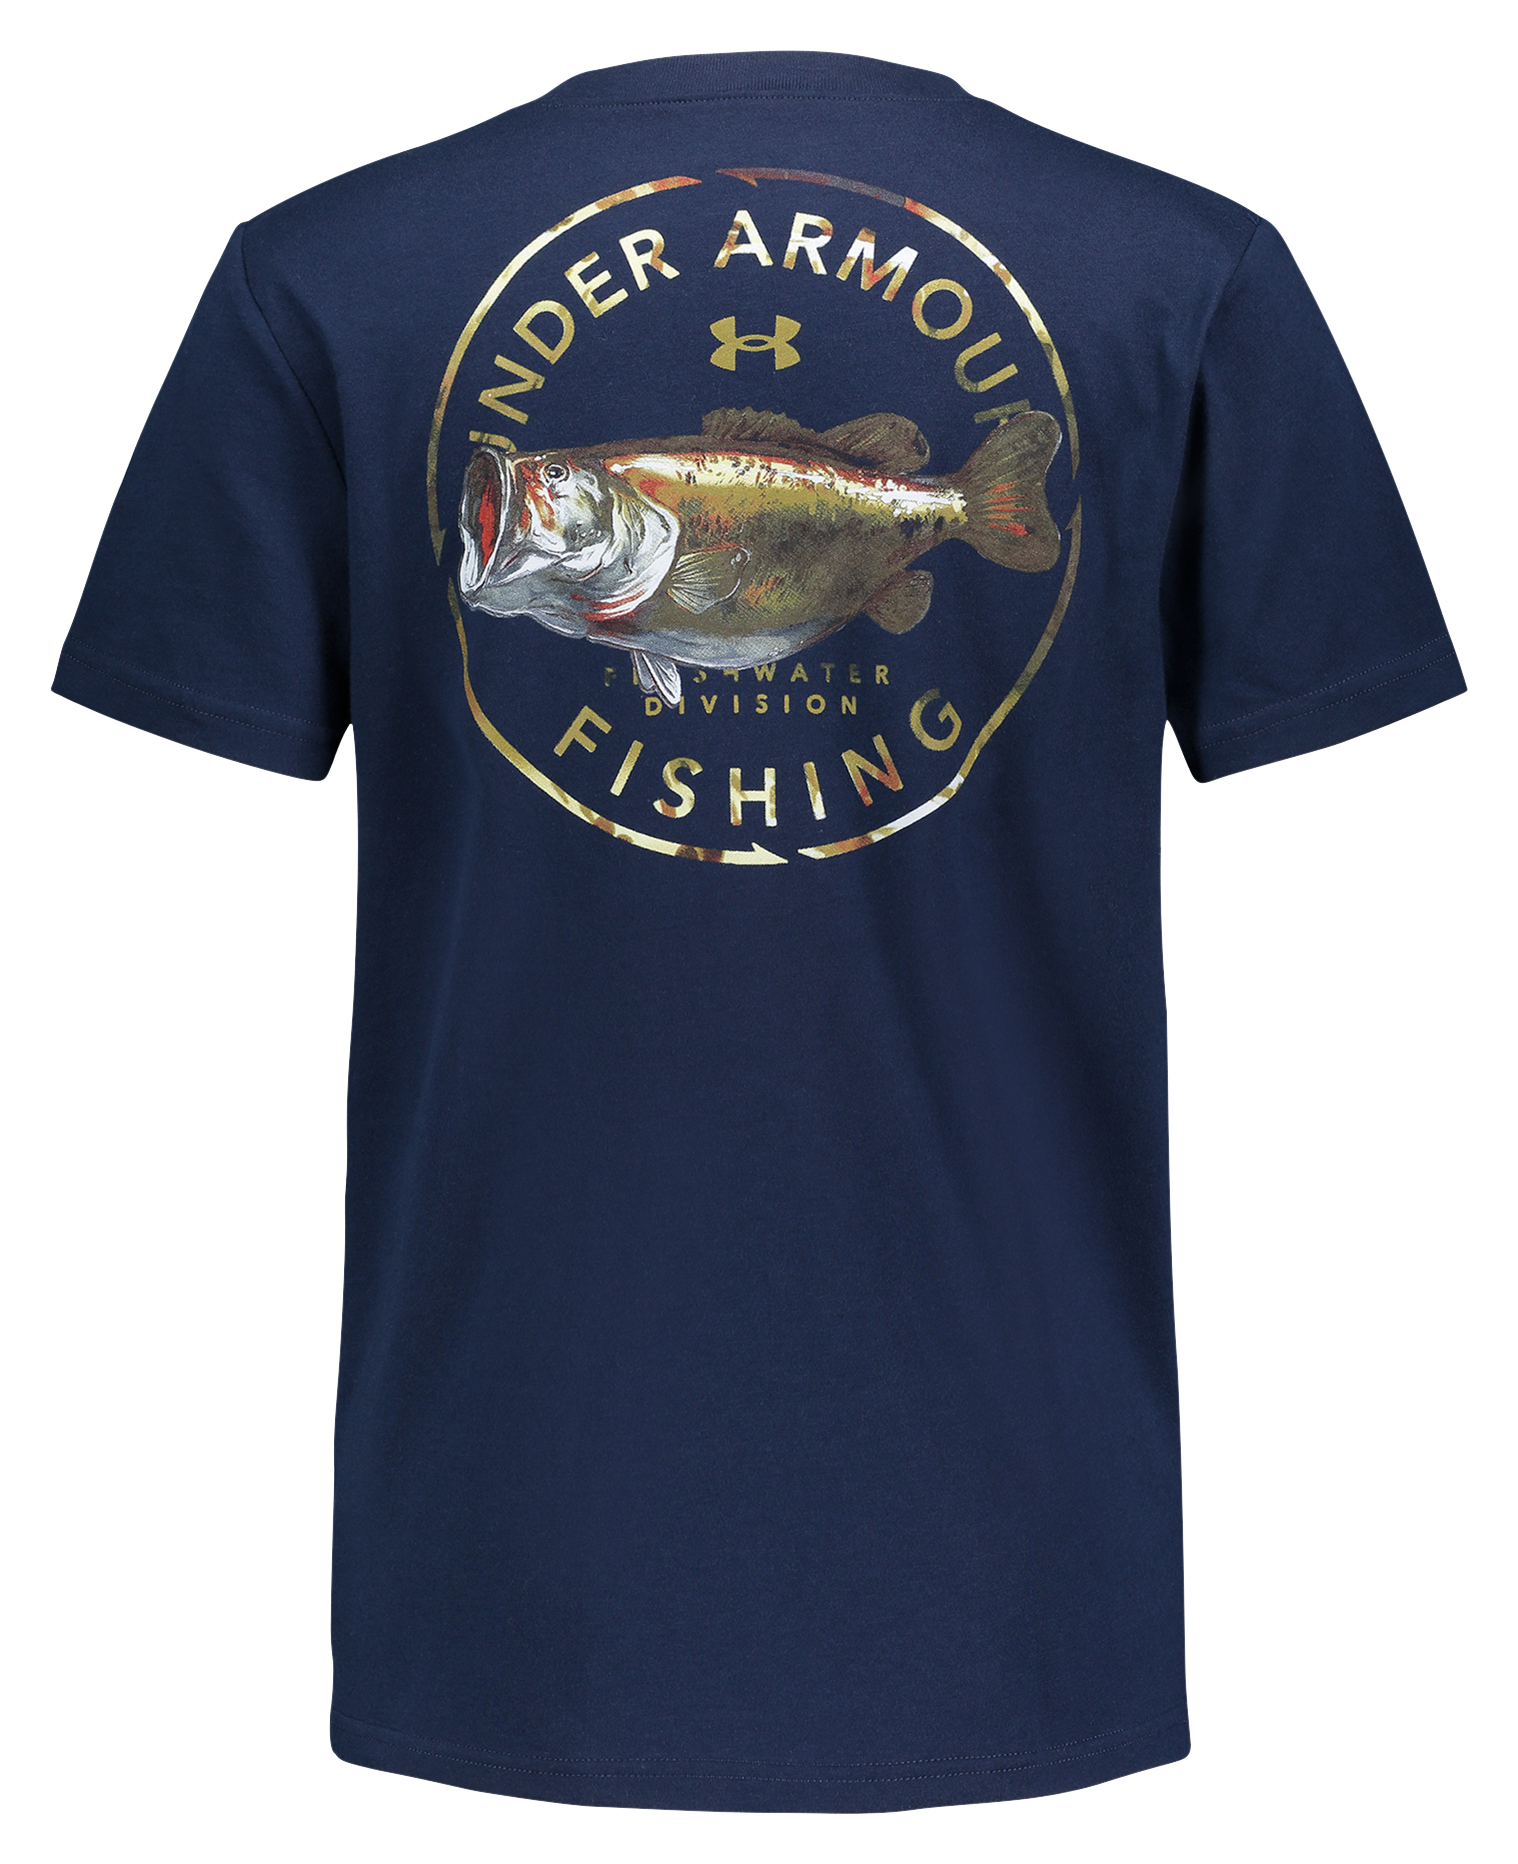 Under Armour Bass Freshwater Division Short-Sleeve T-Shirt for